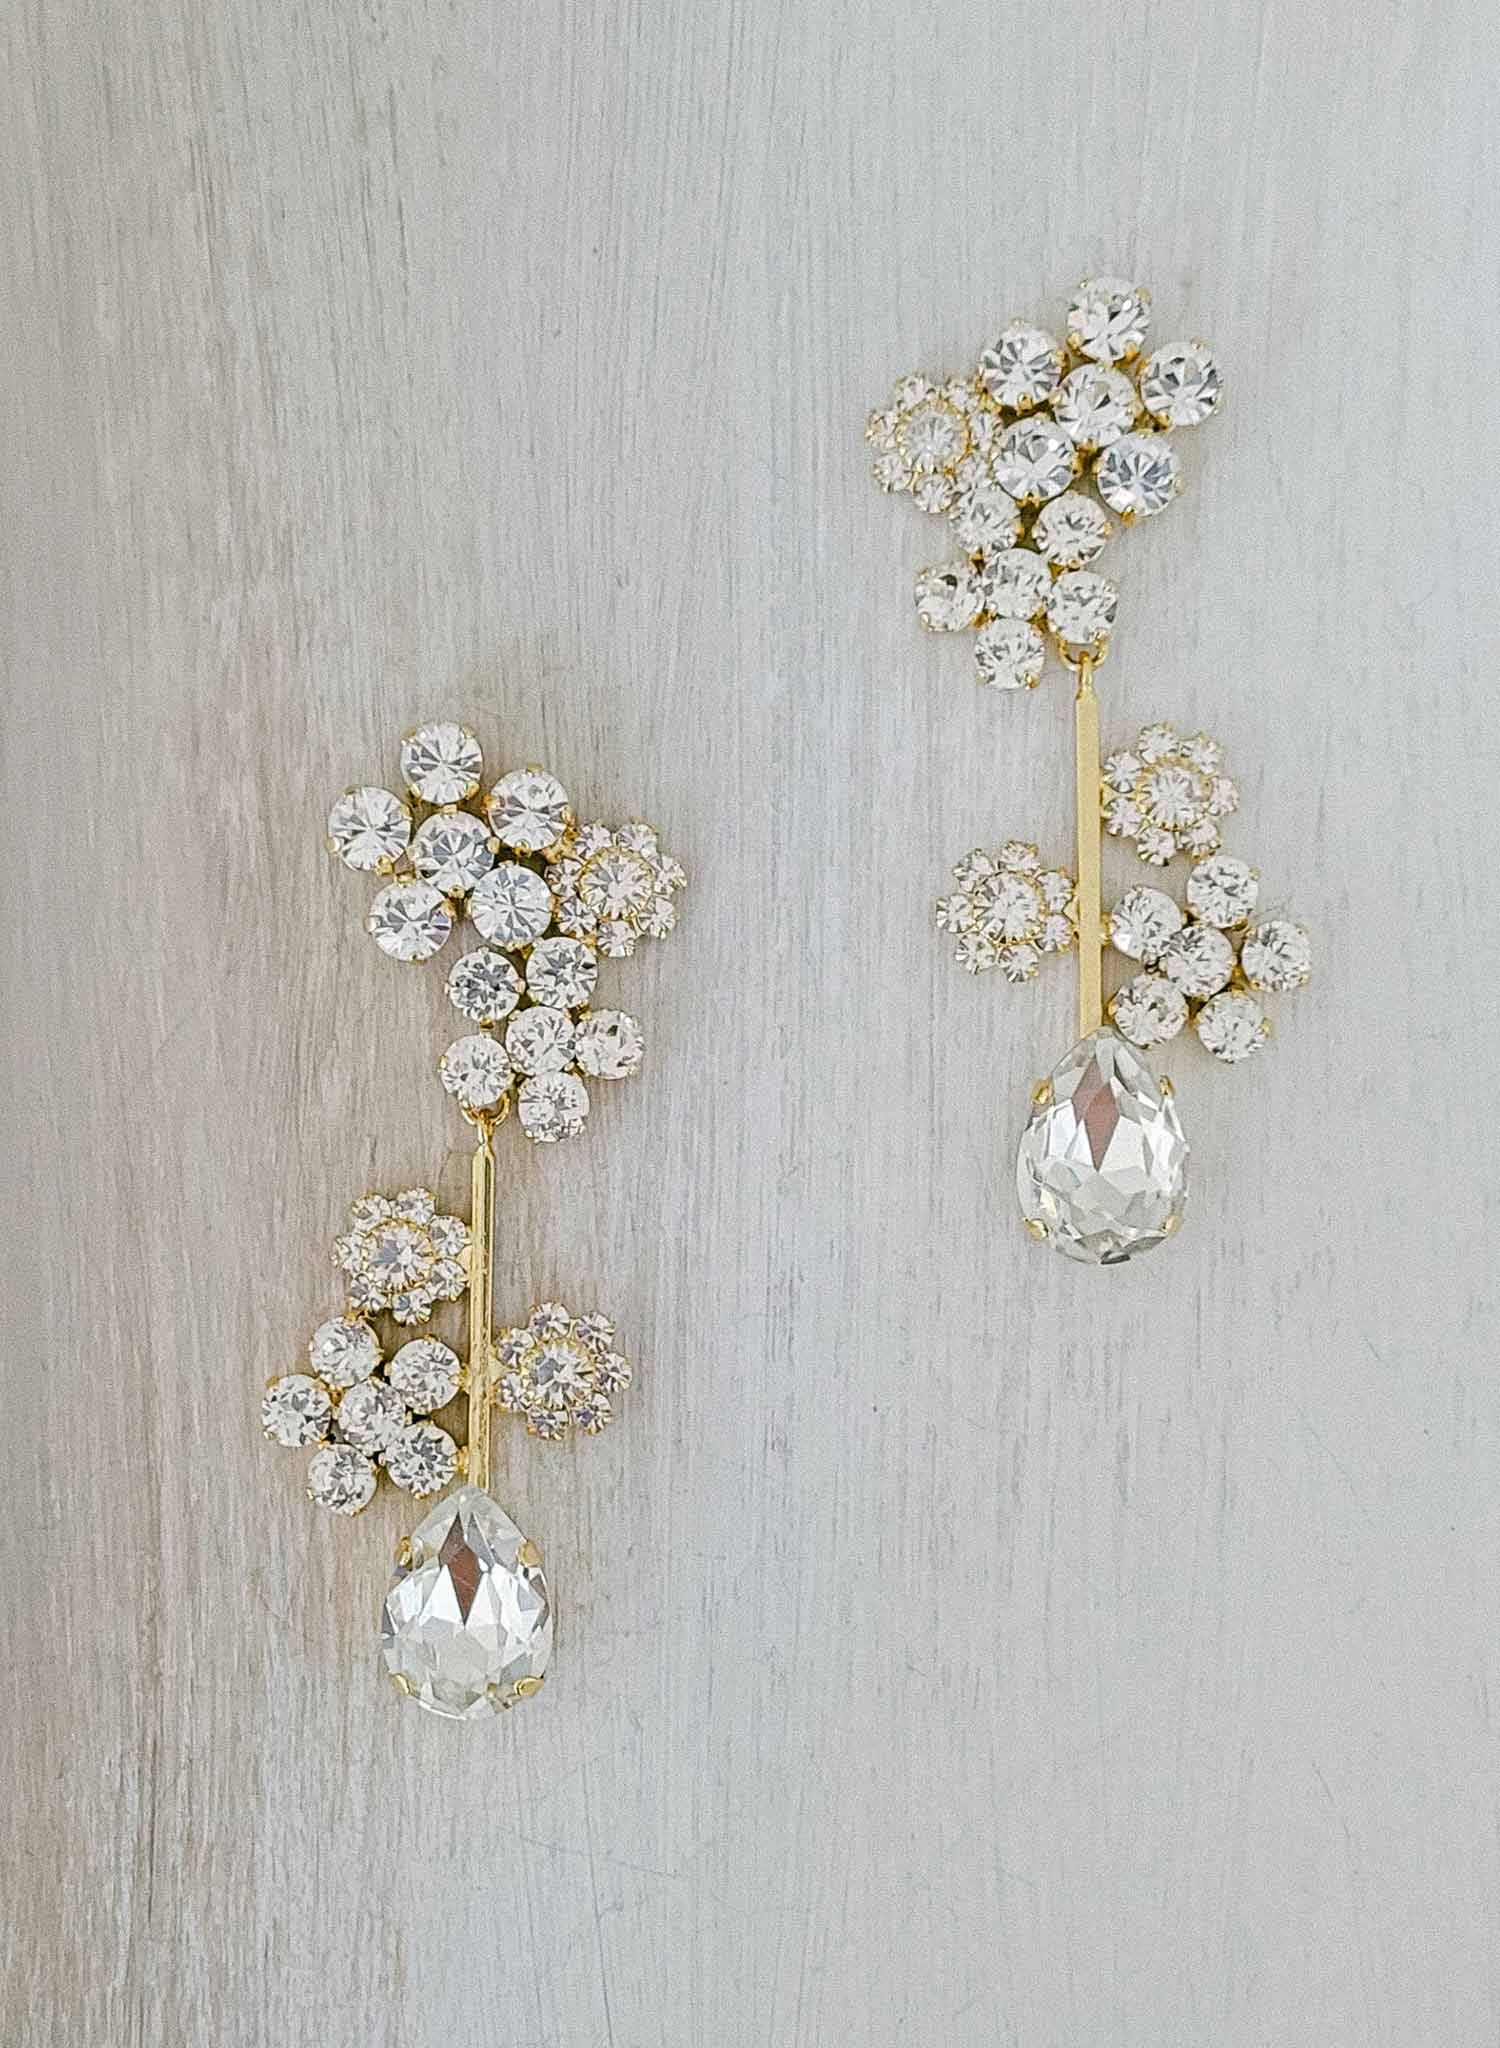 Bridal Jewelry, Crystal Flower Earrings - Crystal Blossom Stud Earrings - Style #2385 Gold (As Pictured)